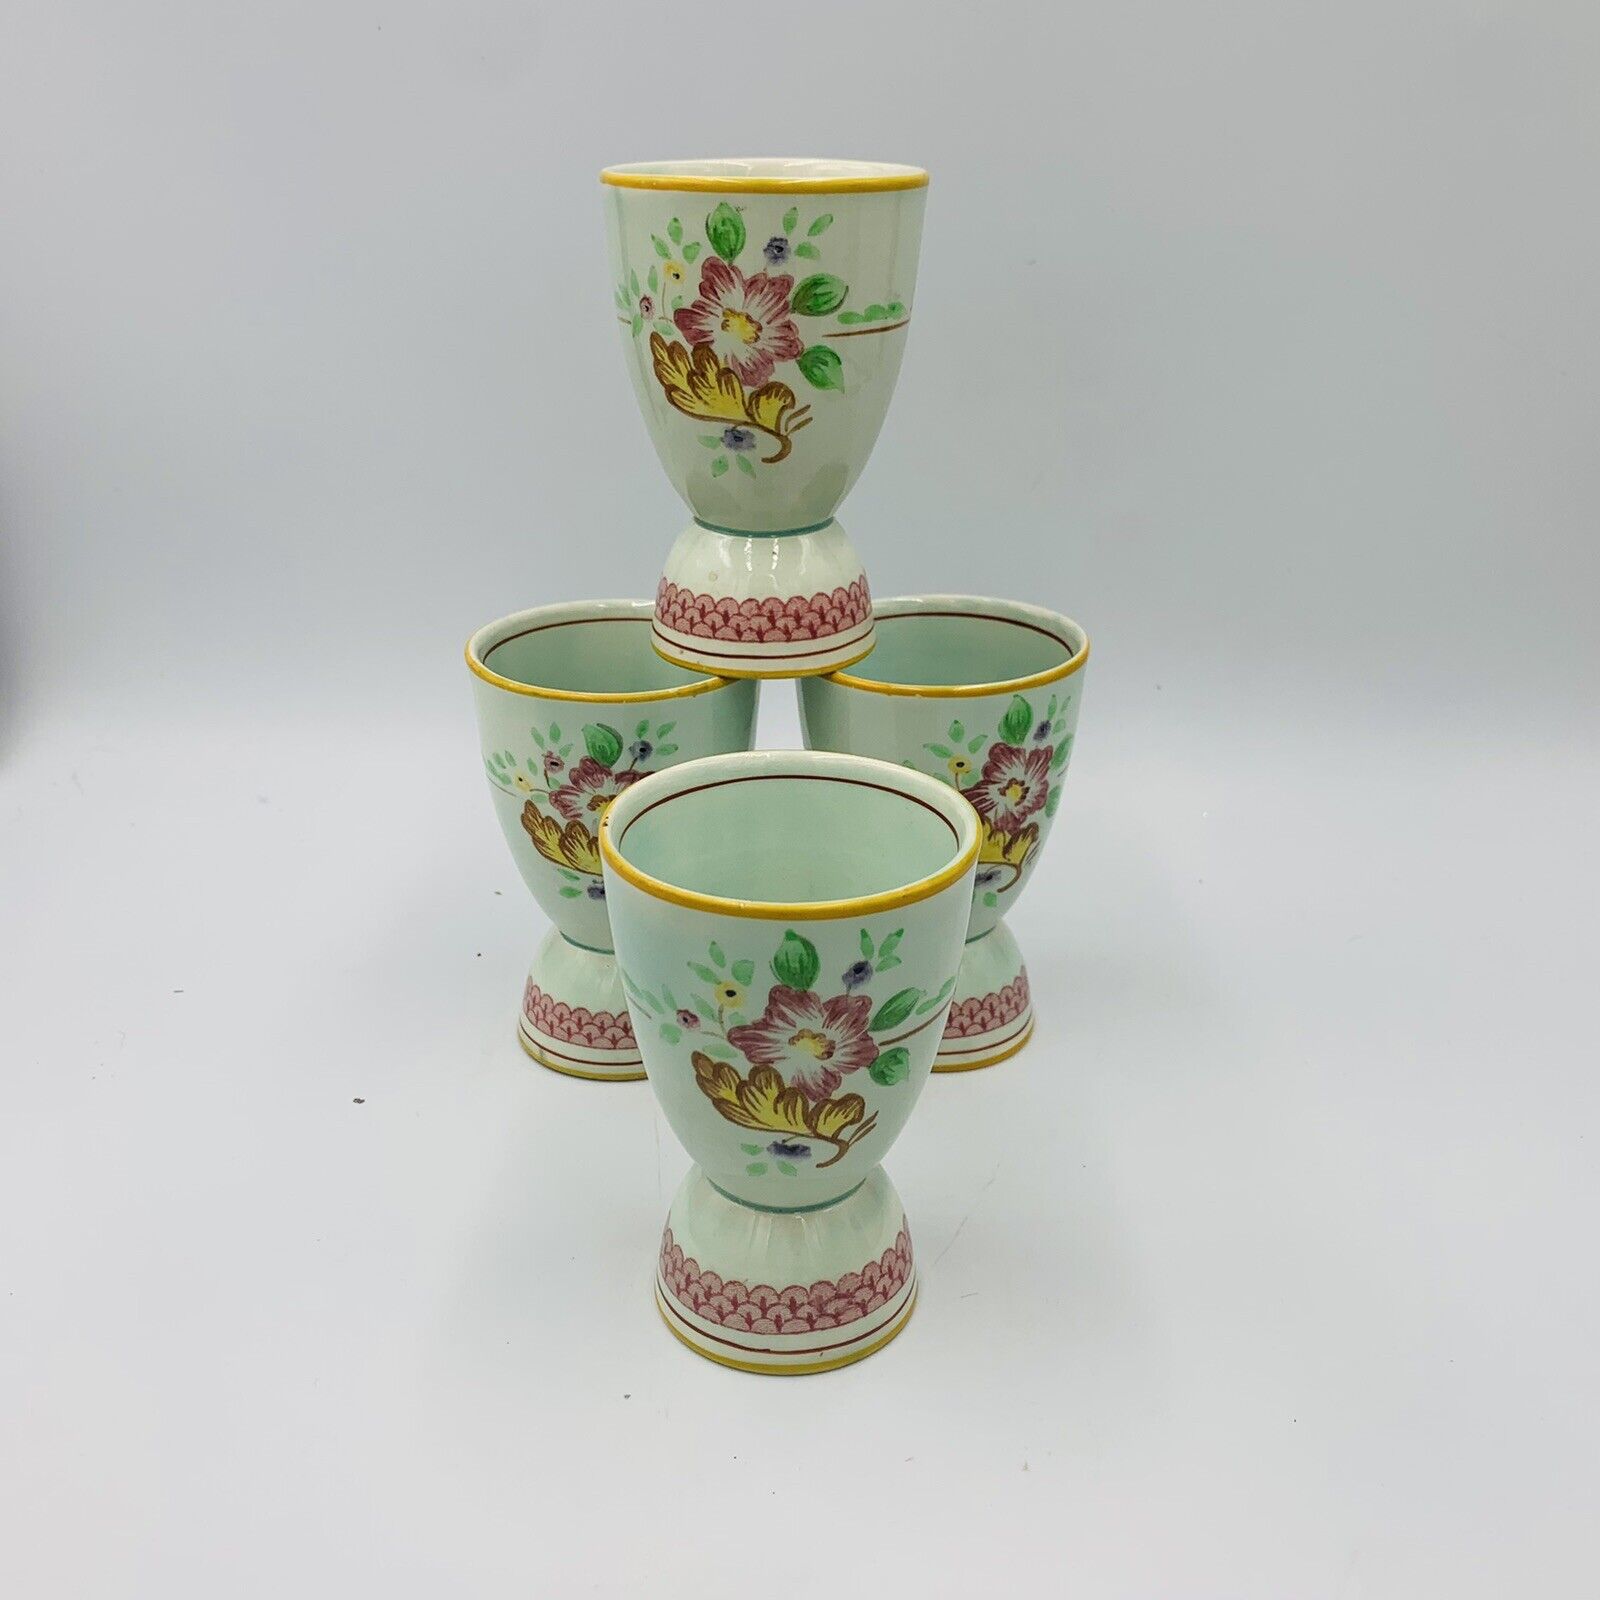 set 4 Carolynn 3.75” Egg Cups By Adams made in England Floral Light Green Pink